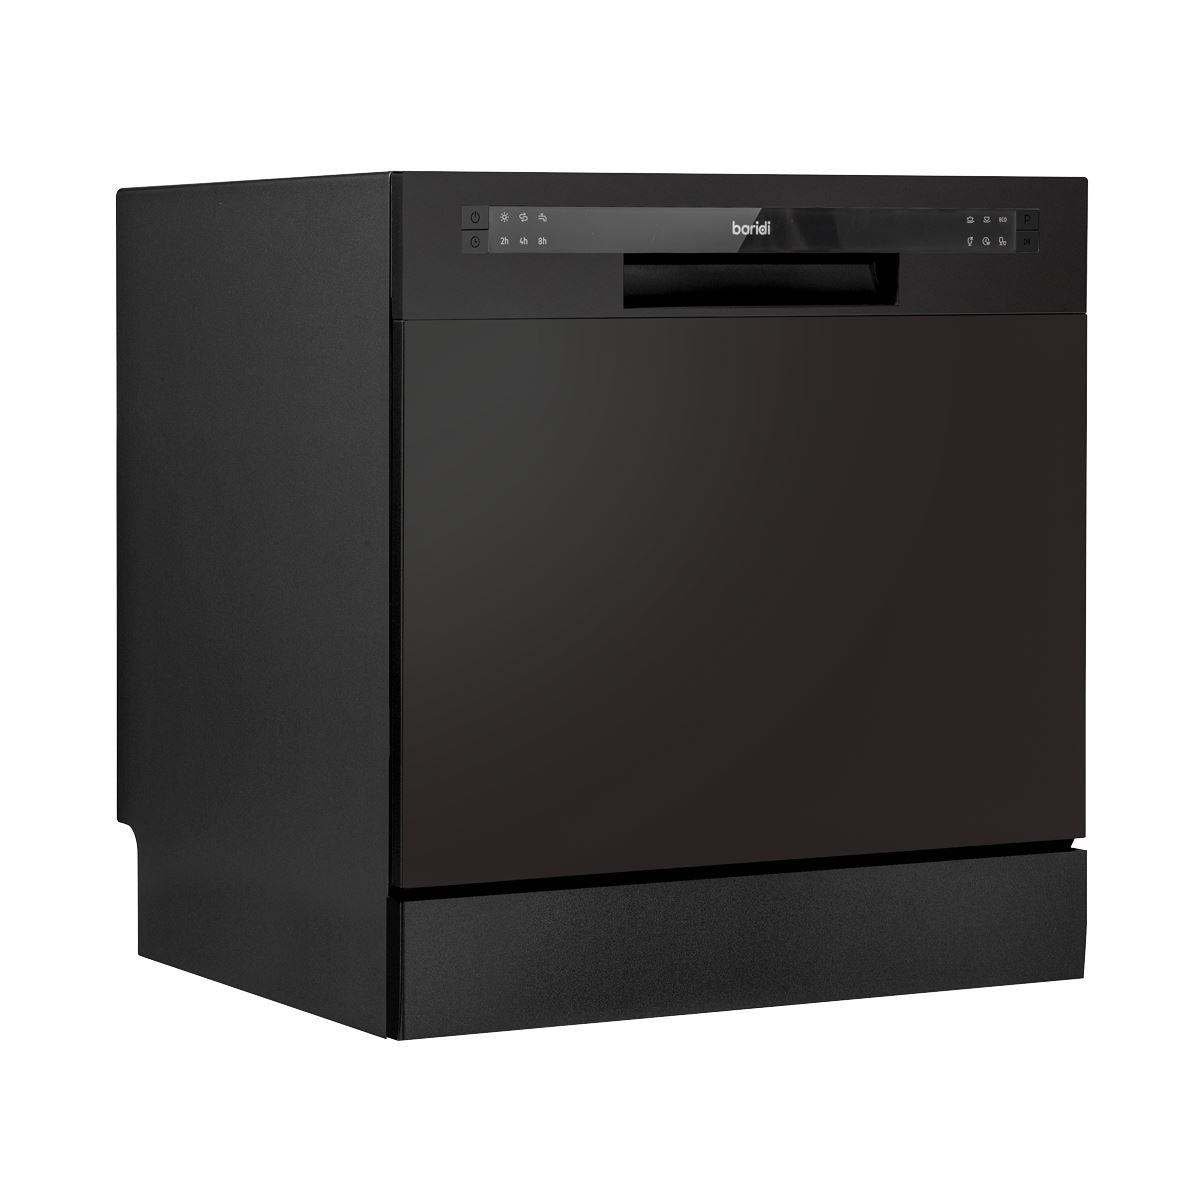 Baridi Compact Tabletop Dishwasher 8 Place Settings, 6 Programmes, Low Noise, 8L Cycle, Start Delay - Black